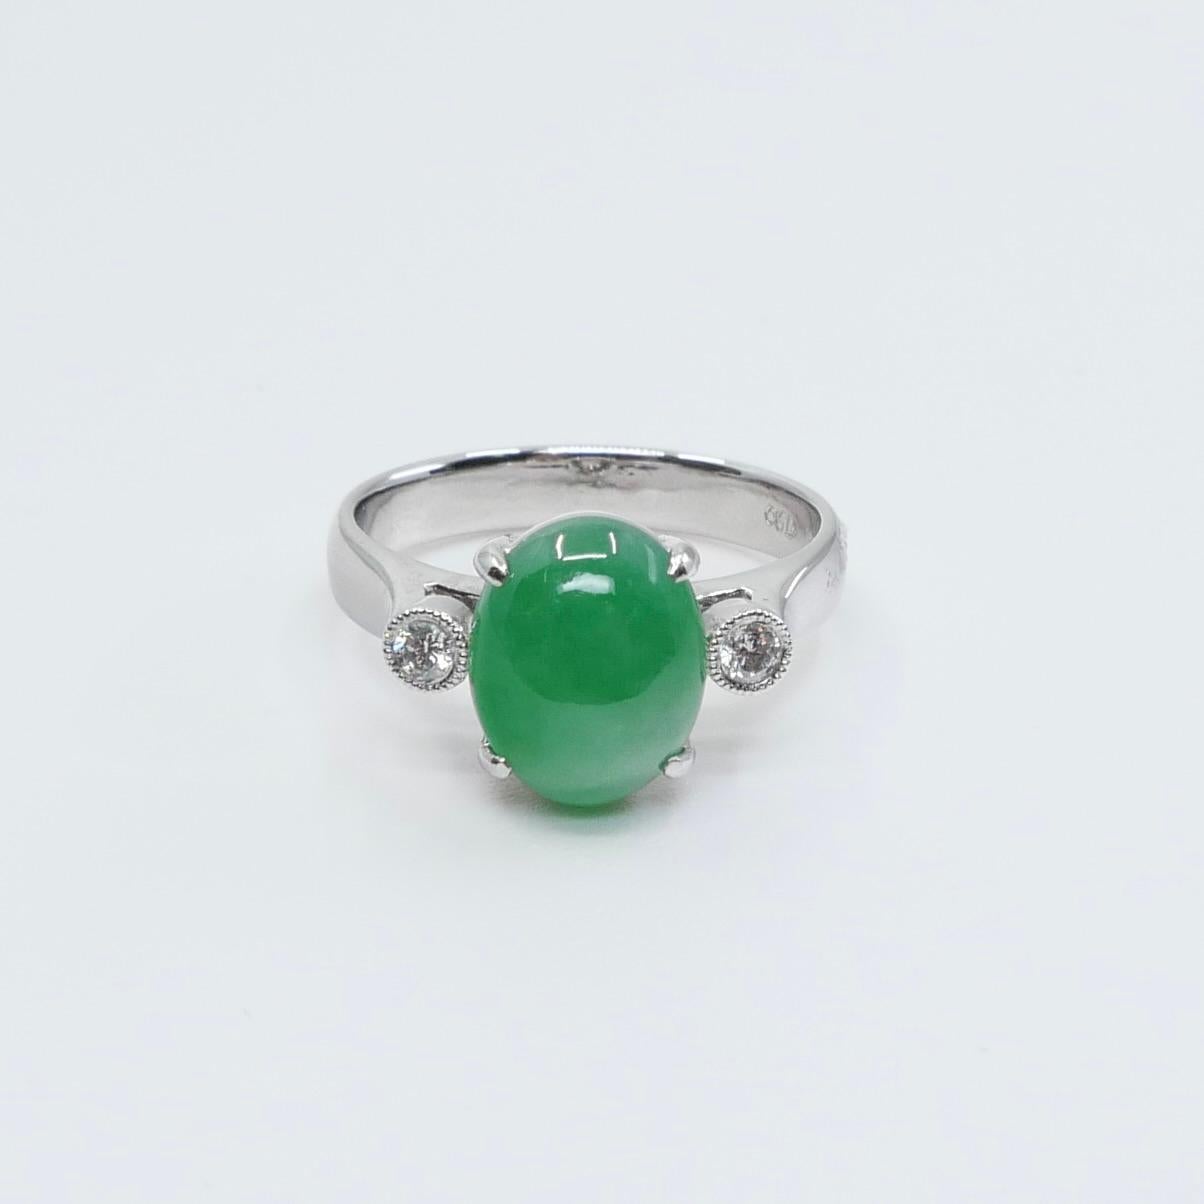 Certified Type a Jade & Oval Diamond 3 Stone Ring, Glowing Apple Green Color For Sale 7